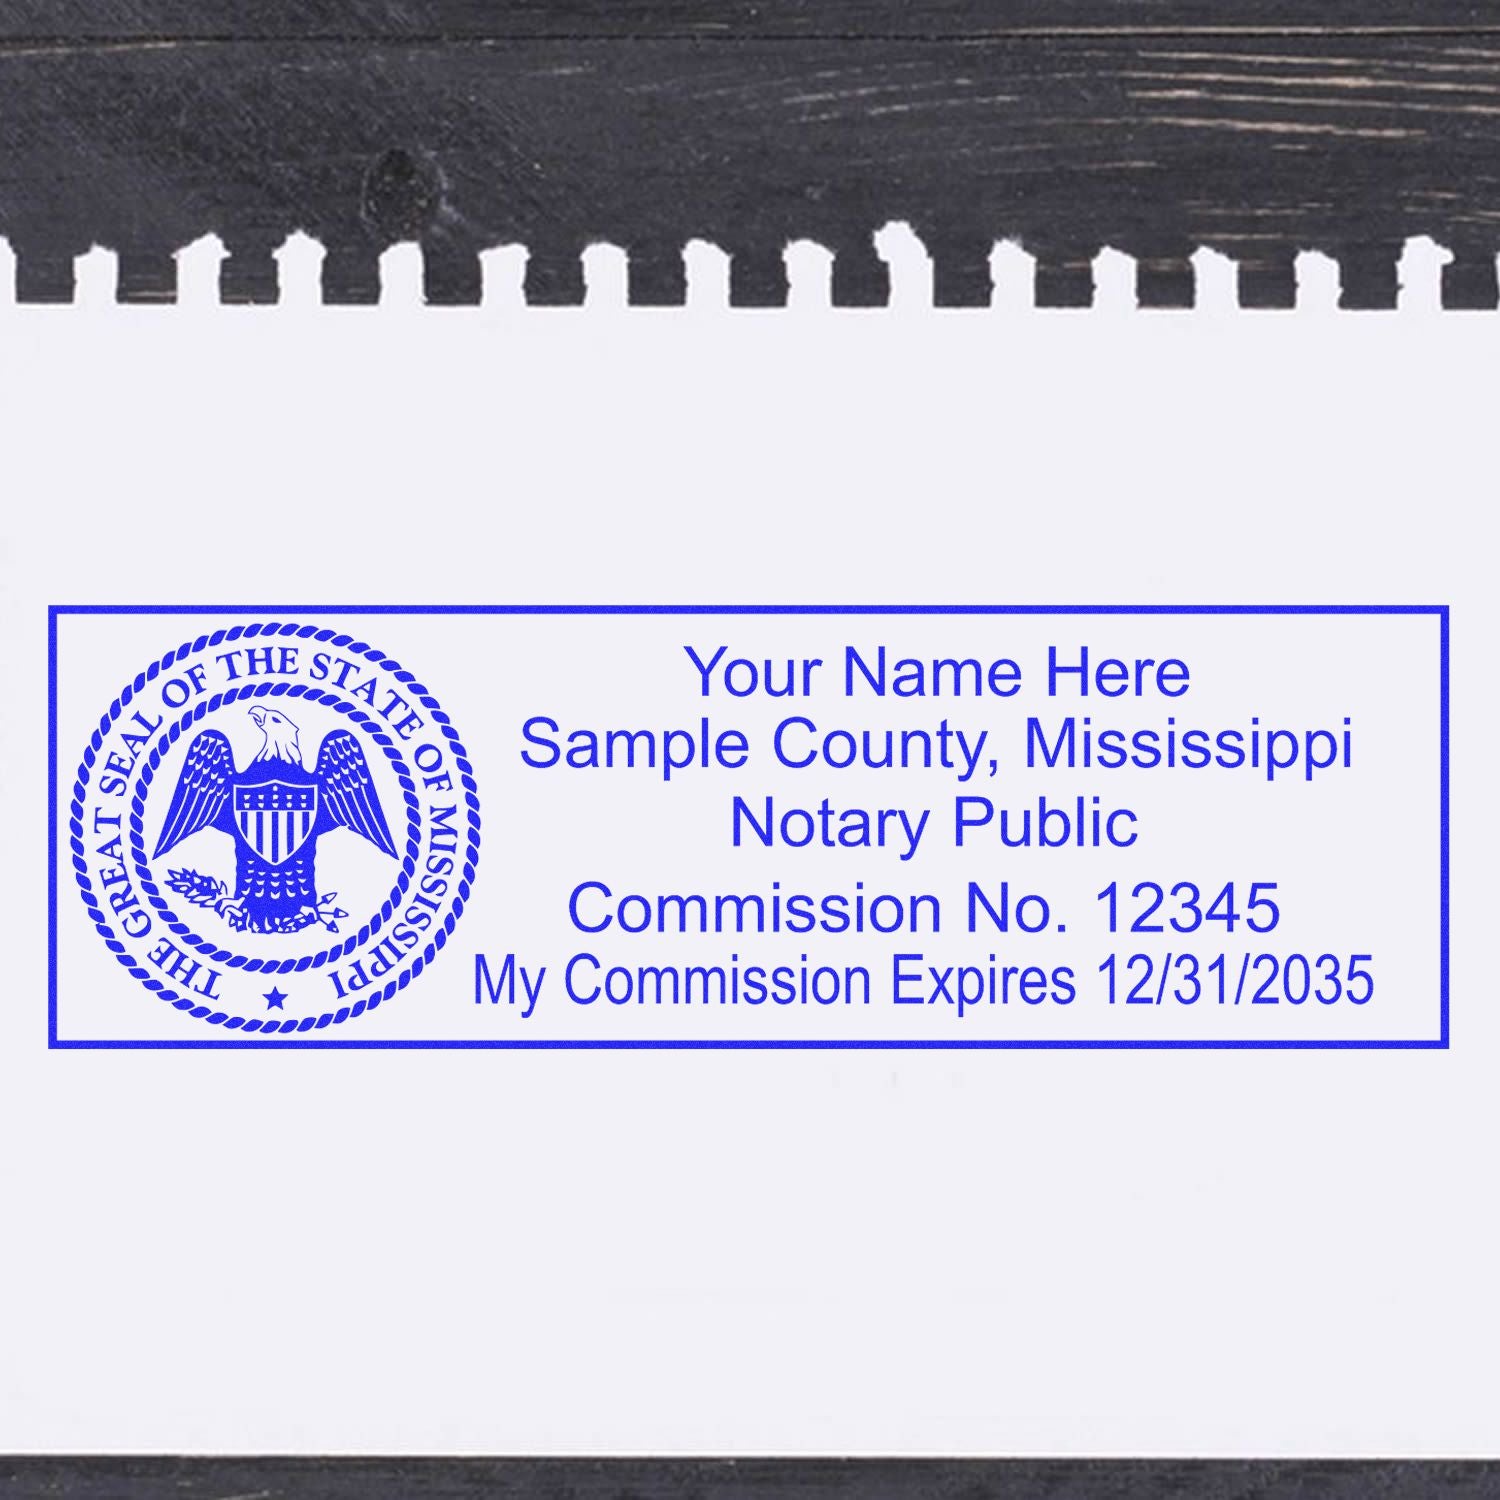 A lifestyle photo showing a stamped image of the Wooden Handle Mississippi State Seal Notary Public Stamp on a piece of paper